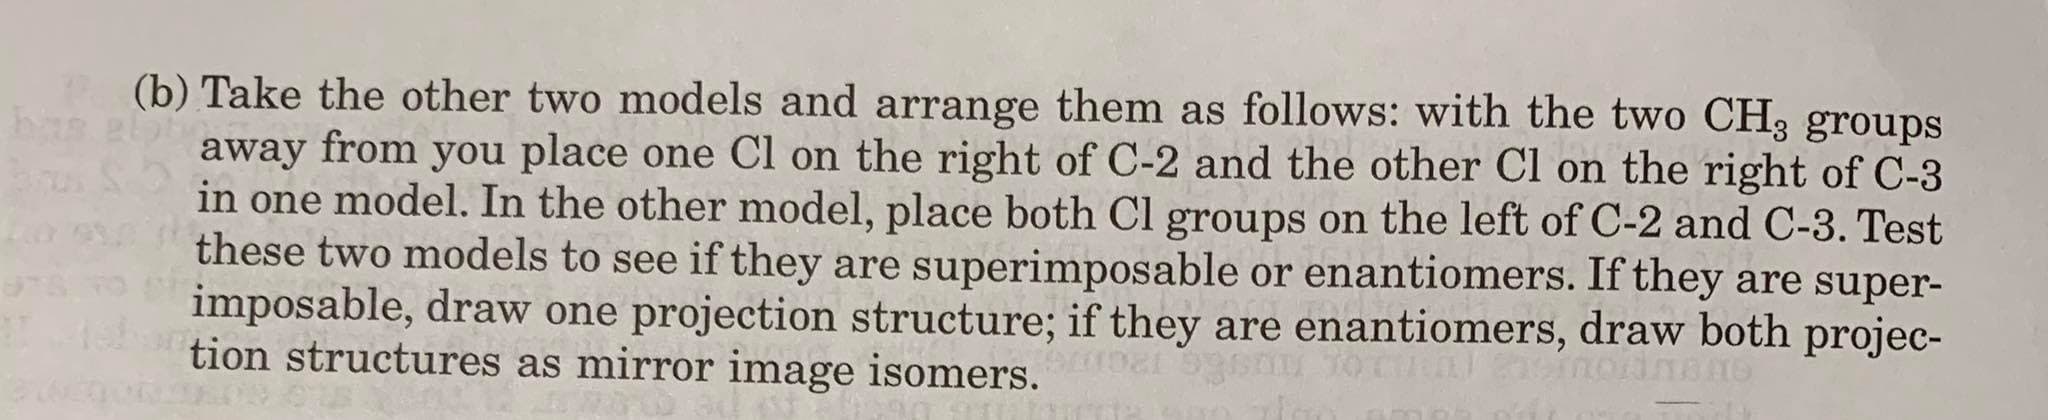 (b) Take the other two models and arrange them as follows: with the two CH, groups
elaby
away from you place one Cl on the right of C-2 and the other Cl on the right of C-3
in one model. In the other model, place both Cl groups on the left of C-2 and C-3. Test
these two models to see if they are superimposable or enantiomers. If they are super-
imposable, draw one projection structure; if they are enantiomers, draw both projec-
tion structures as mirror image isomers.
